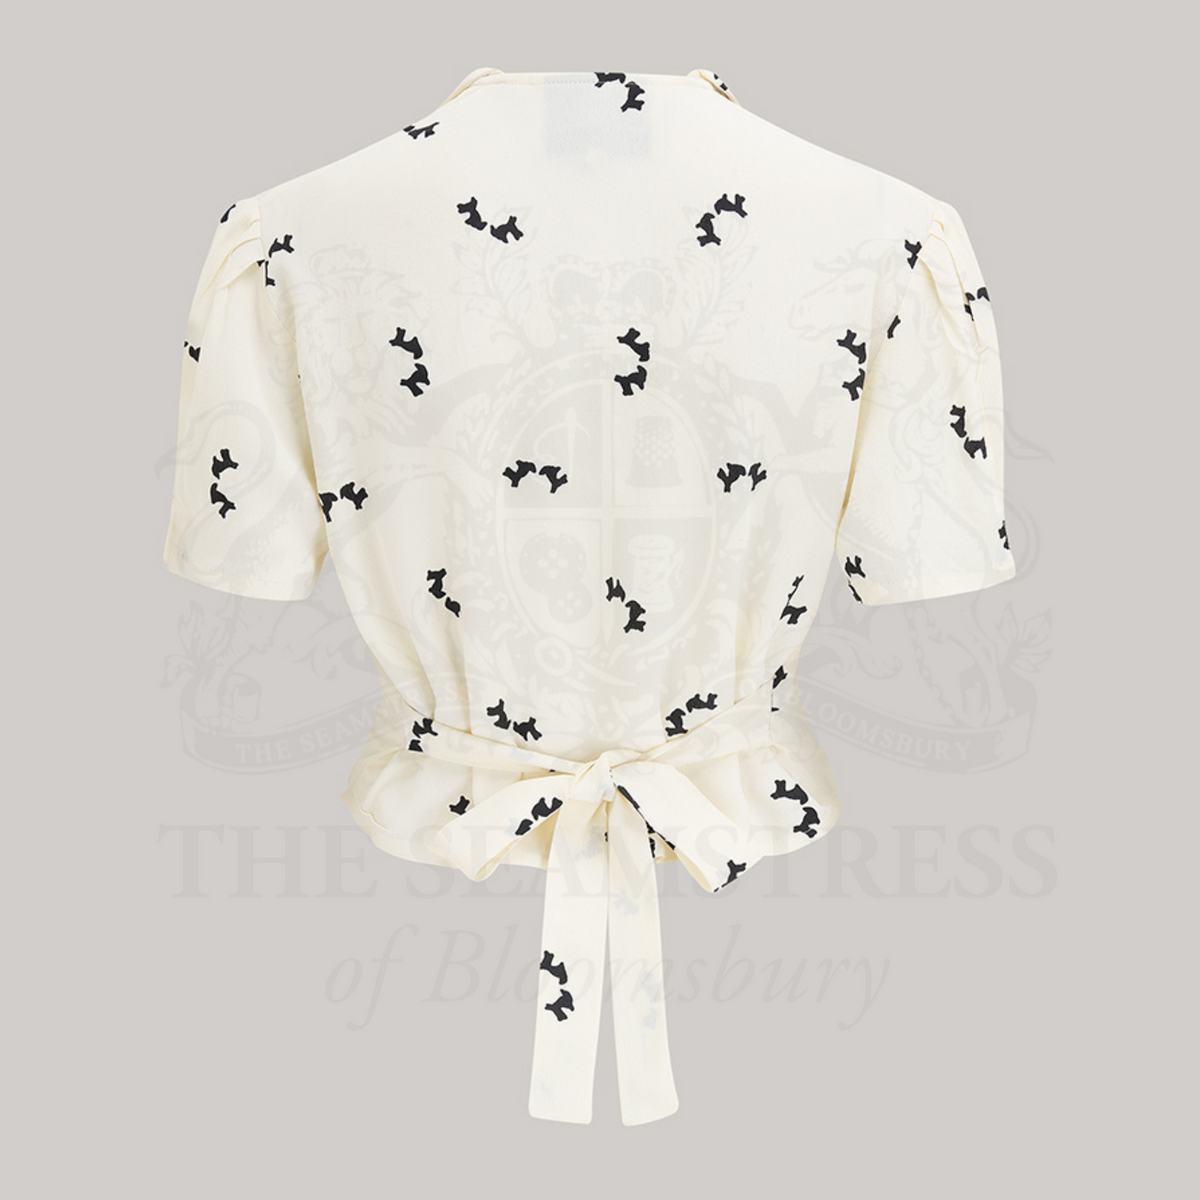 1940s style short sleeve blouse. The blouse is cream coloured with small black dogs dotted around the blouse. Featuring a Peter-Pan front collar, buttons down the front, and a tie-waist belt. 